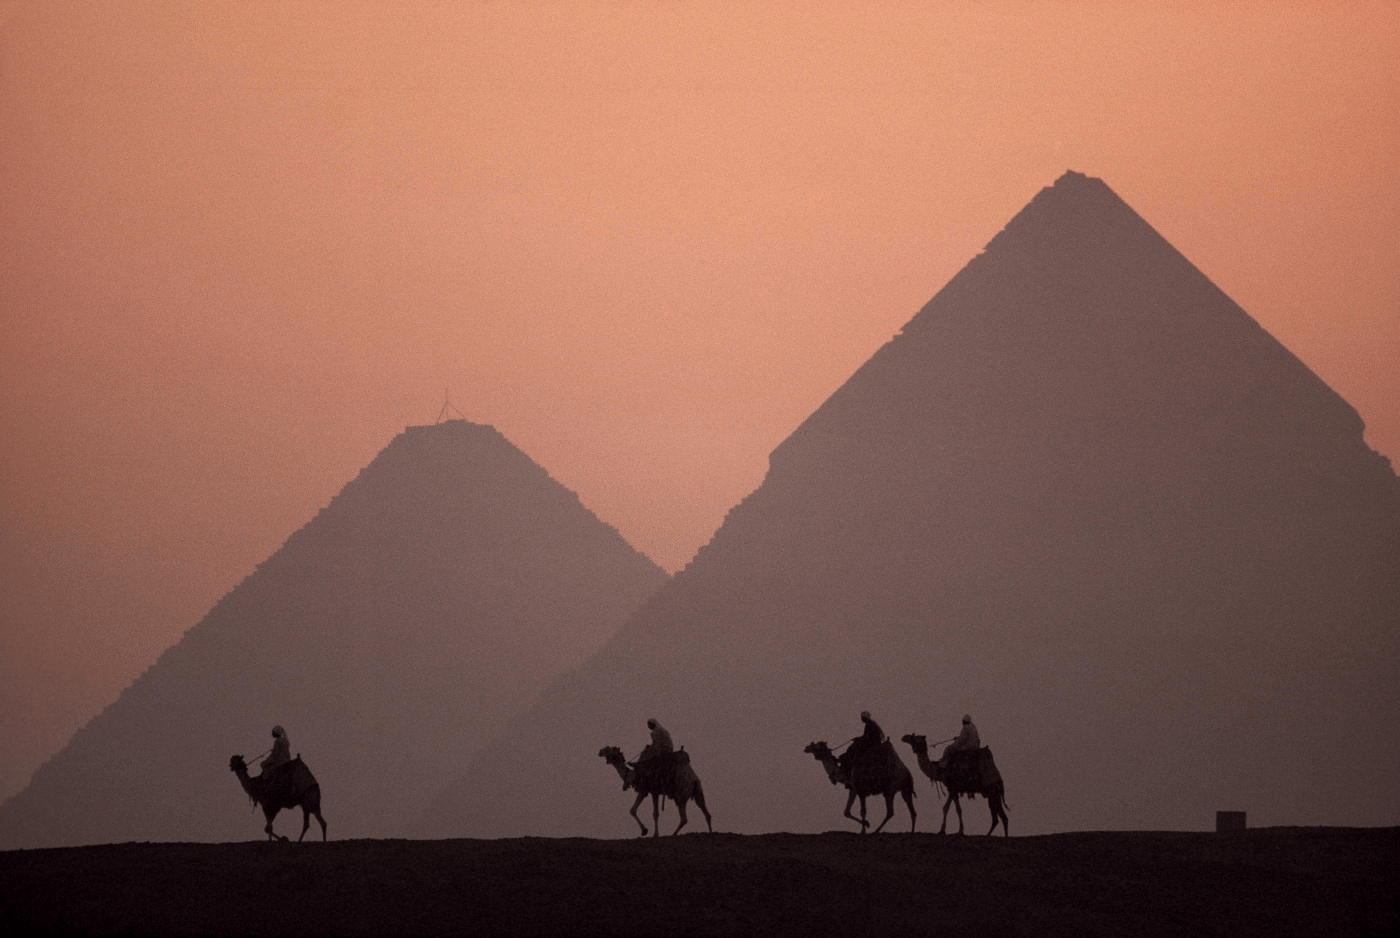 An unedited picture of the pyramids